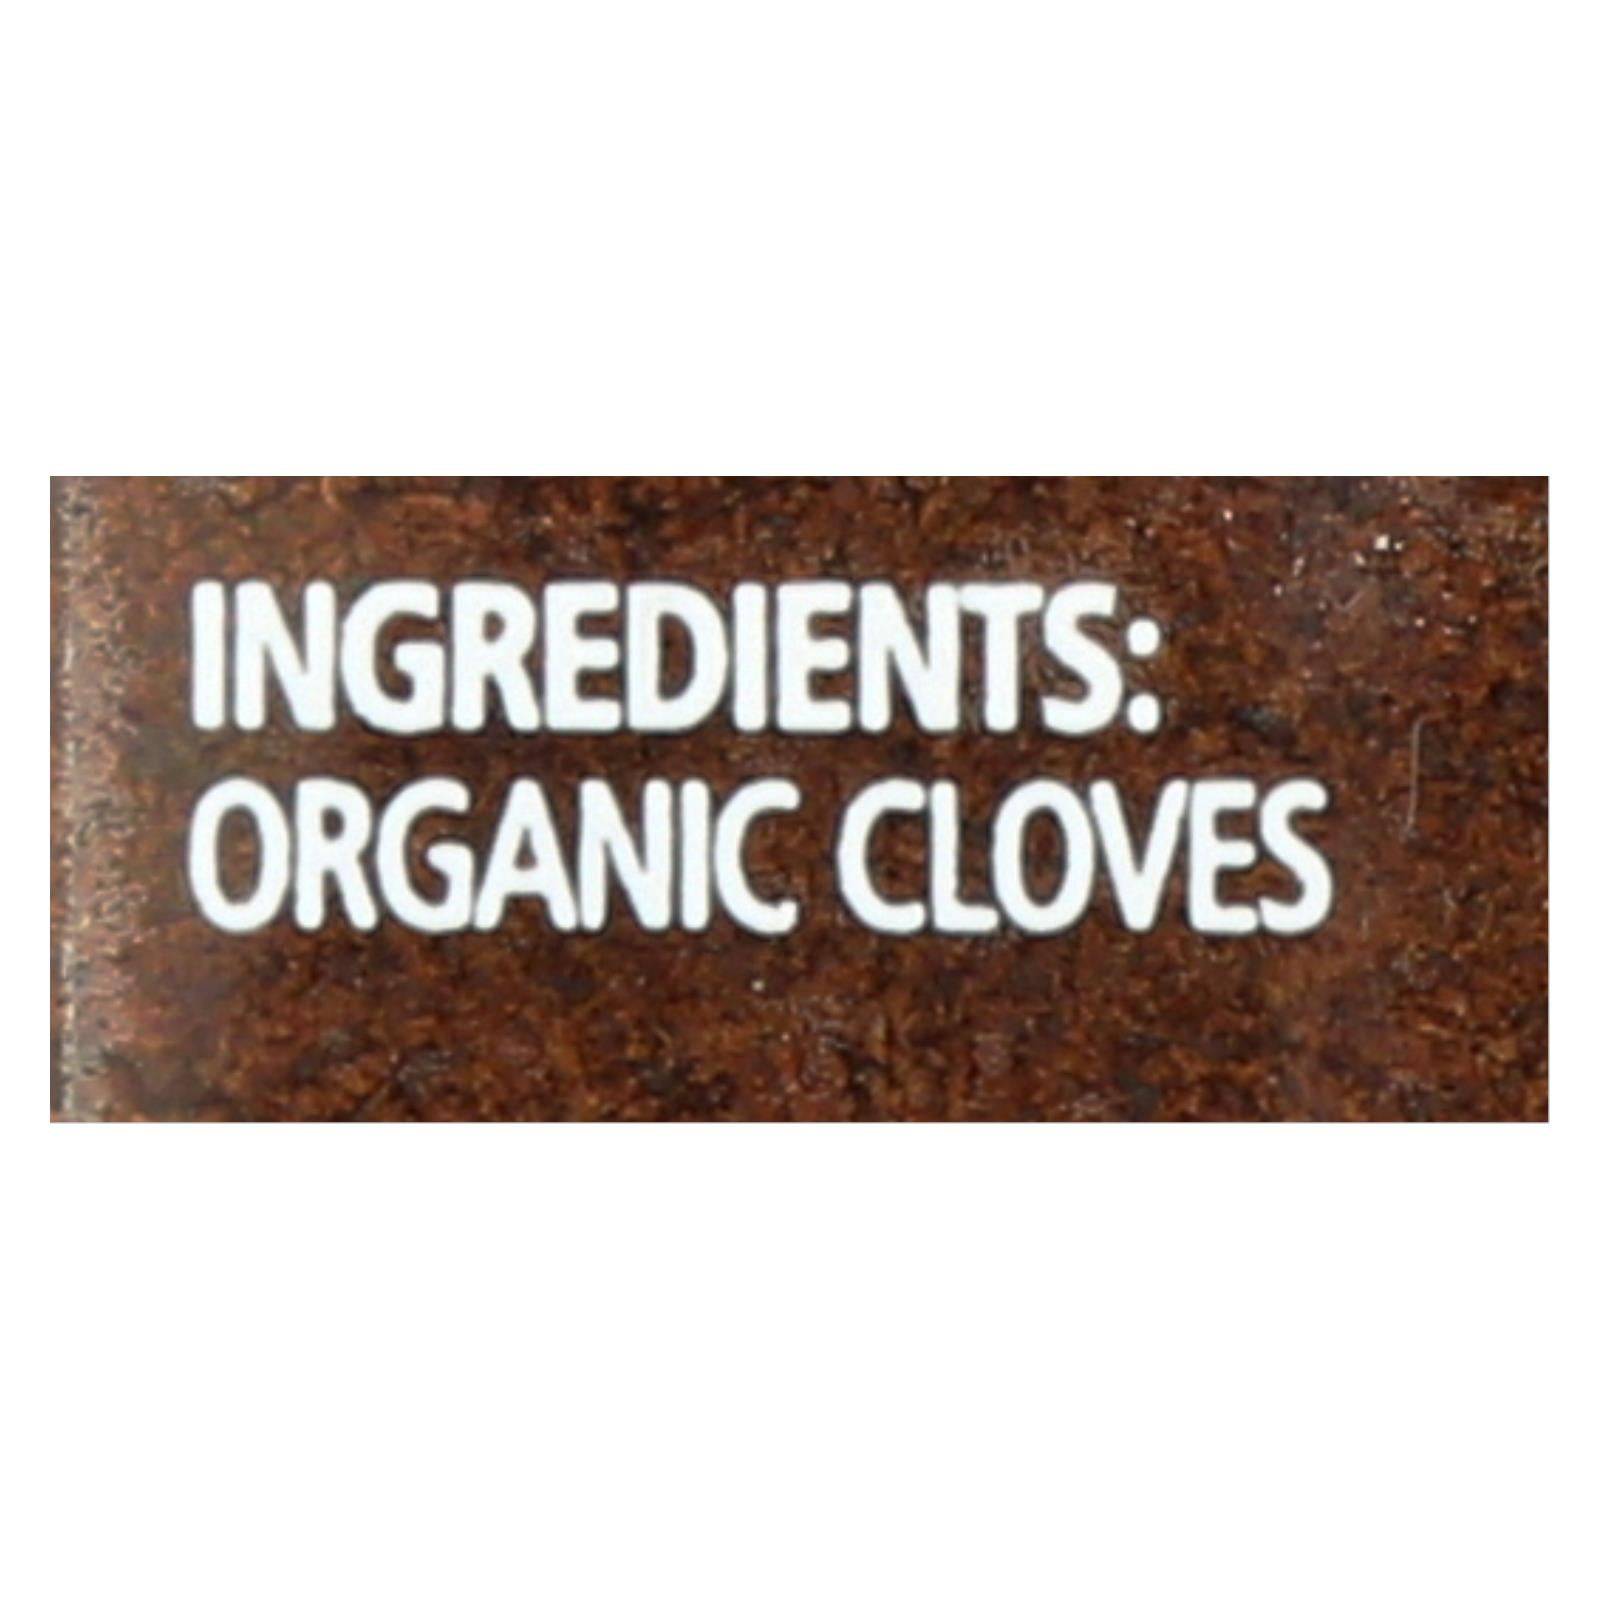 Buy Simply Organic Cloves - Organic - Ground - 2.82 Oz  at OnlyNaturals.us